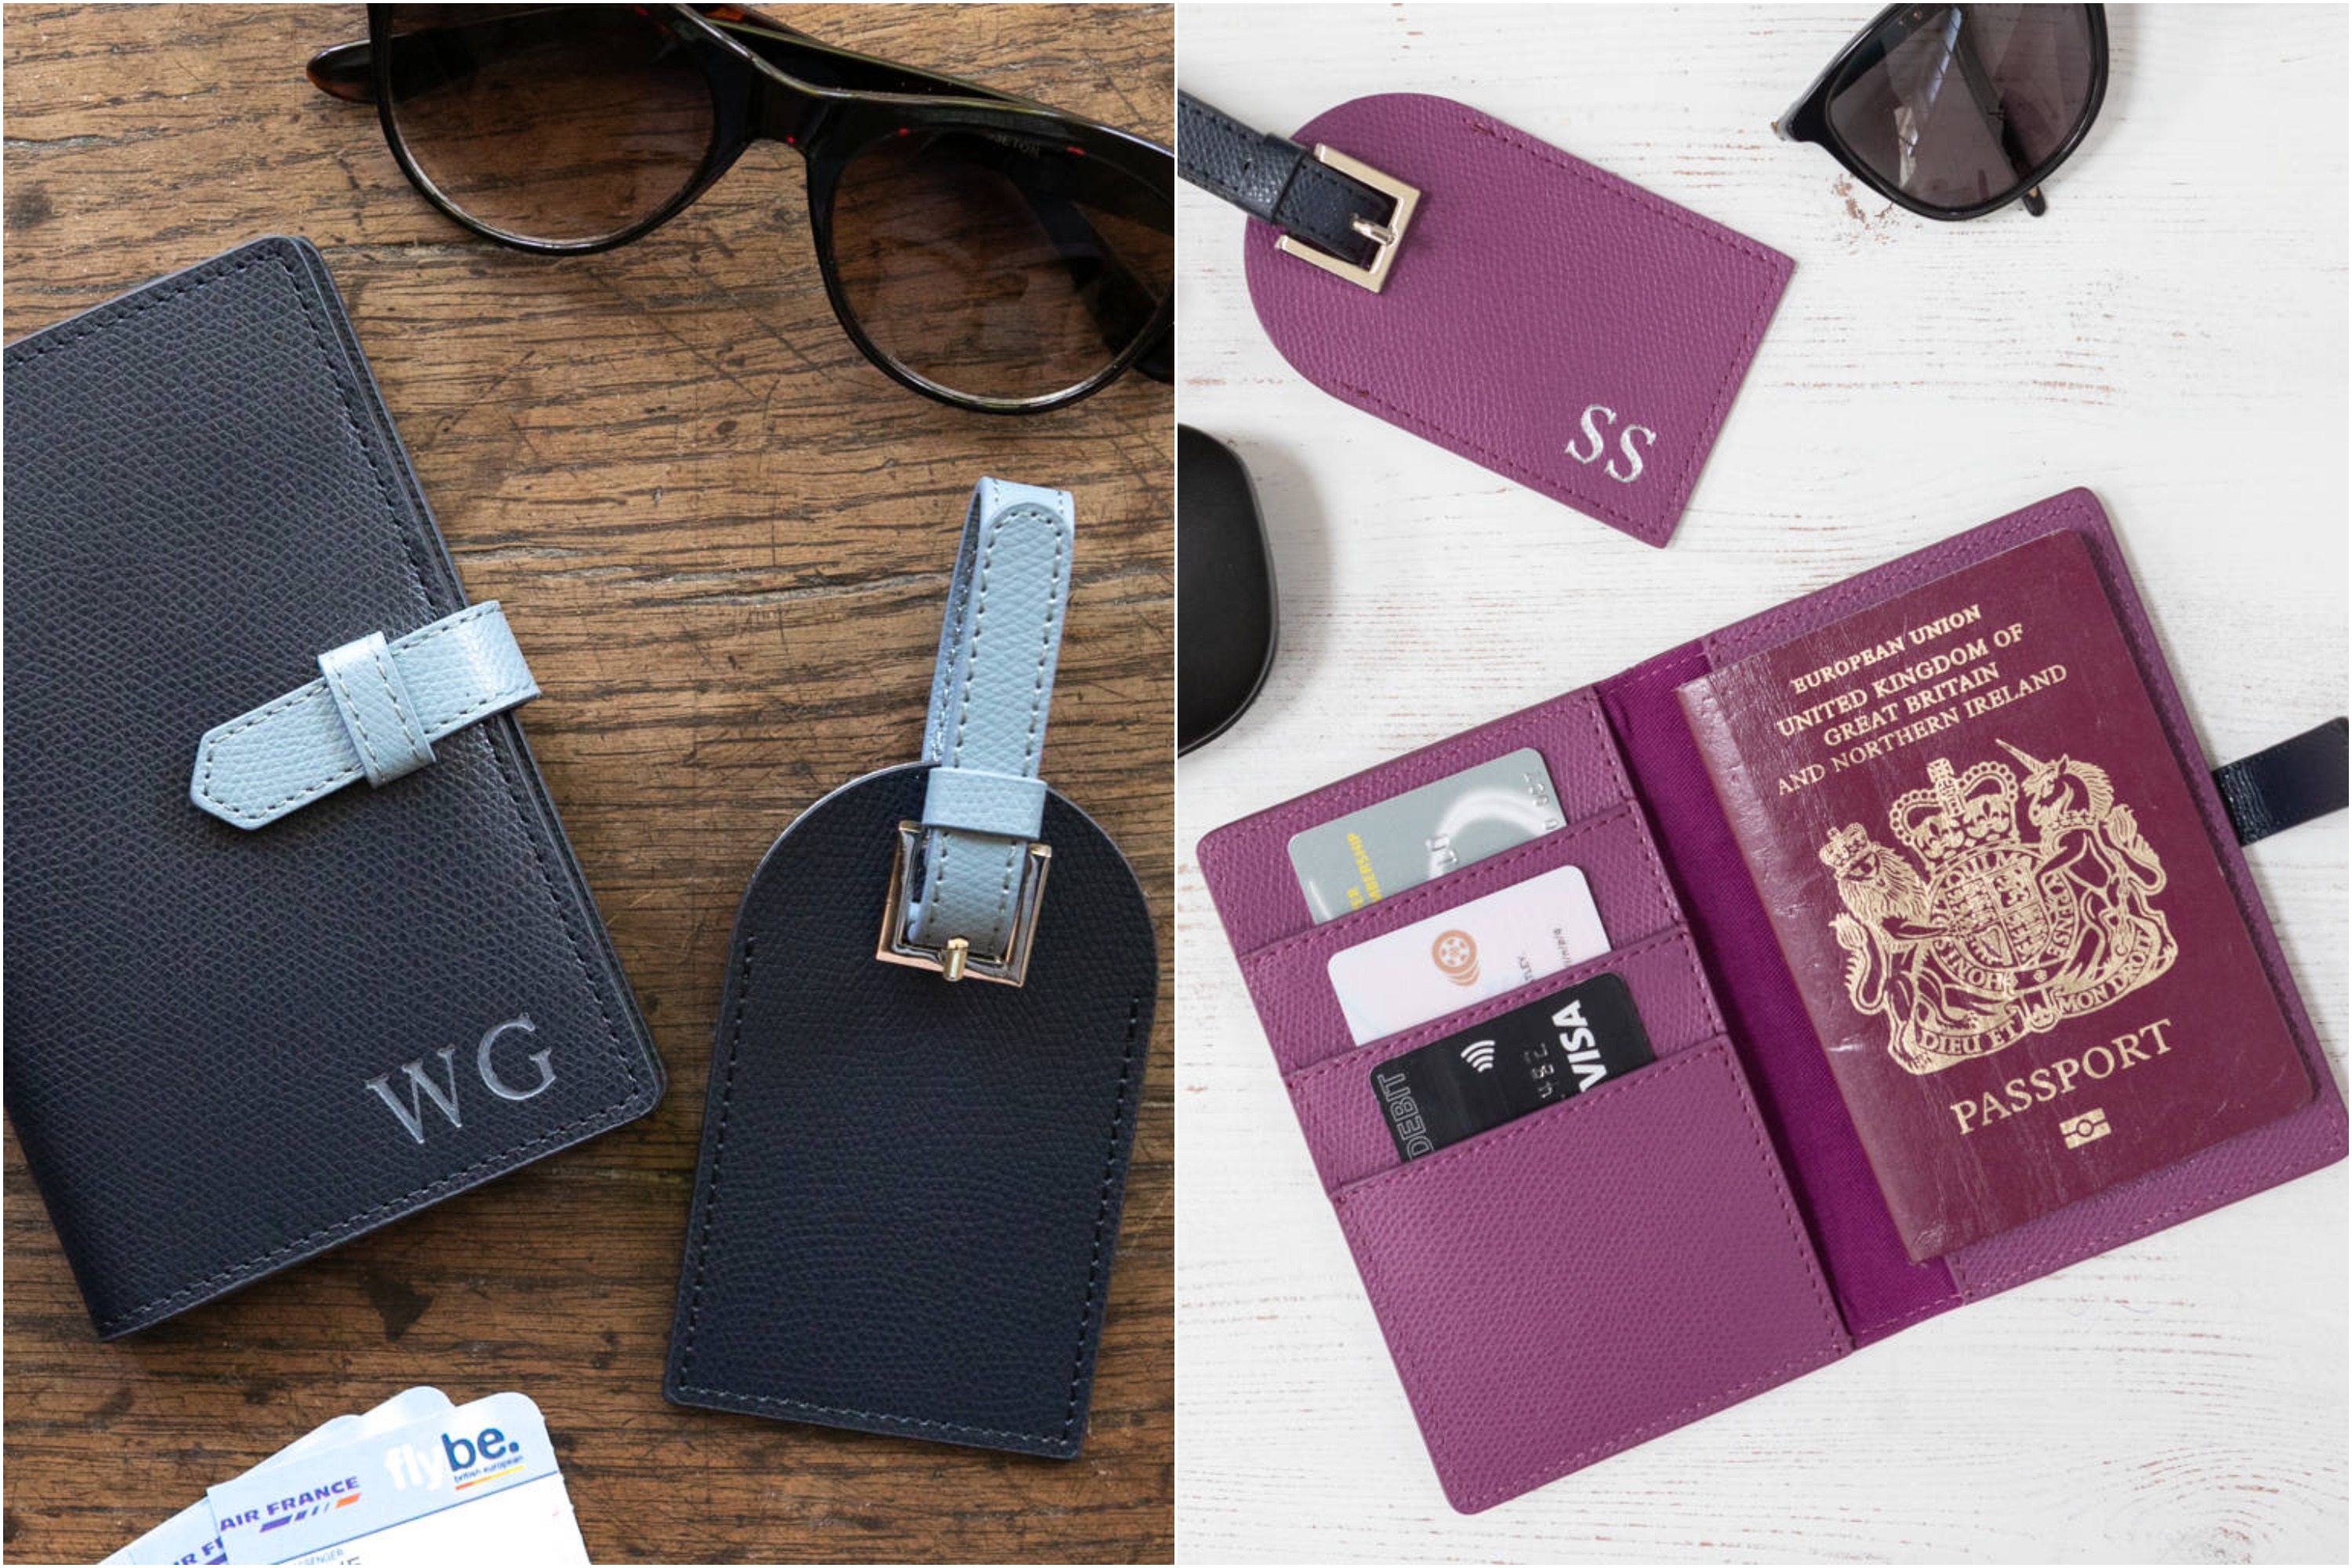 Matching customised luggage tags and passport covers from notonthehighstreet.com. 15 Romantic Travel Gift Ideas for Valentine's Day